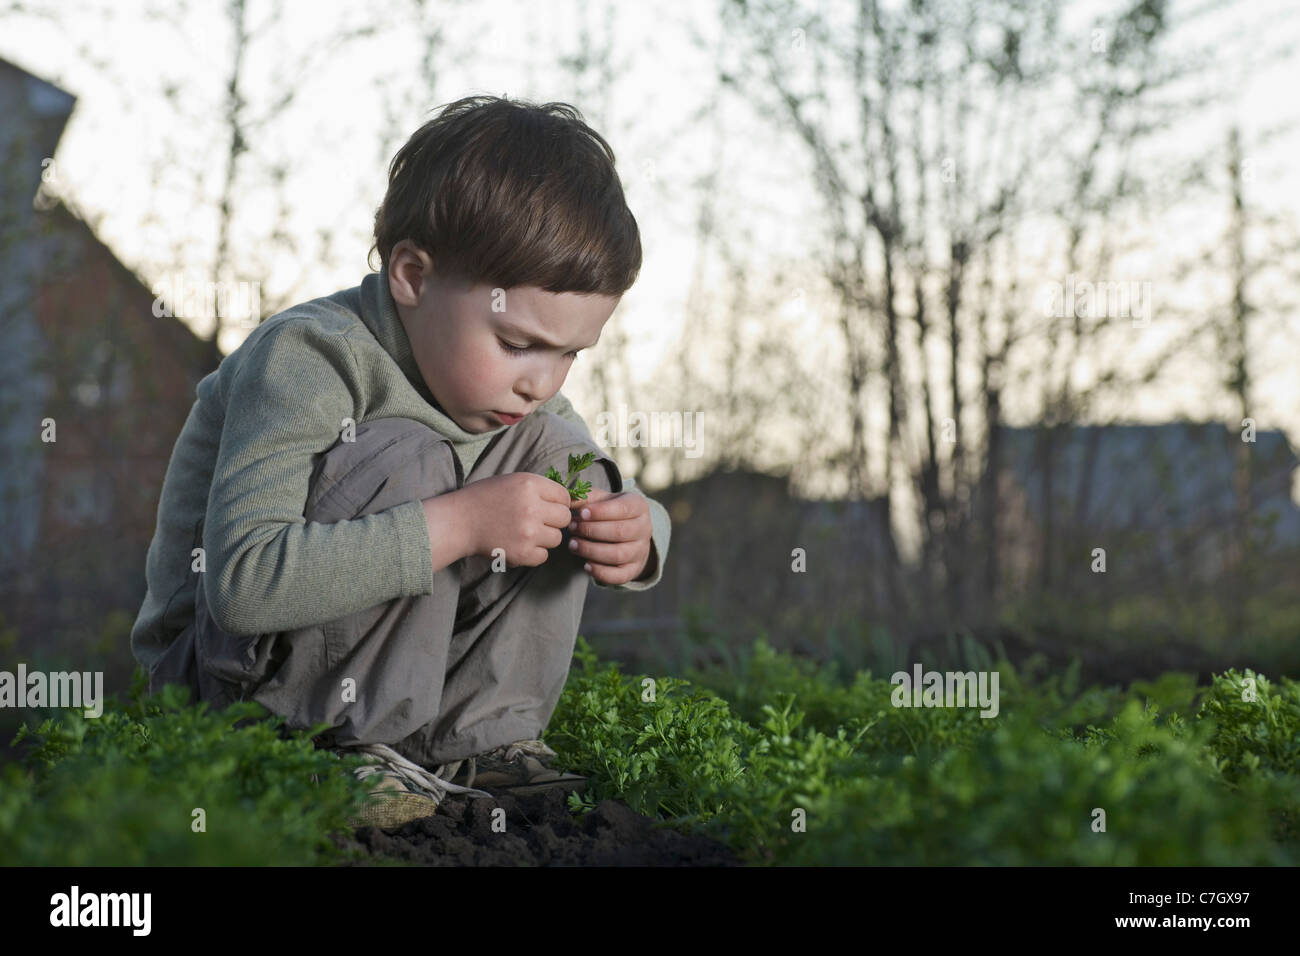 A boy staring intently at a leaf, autumn Stock Photo